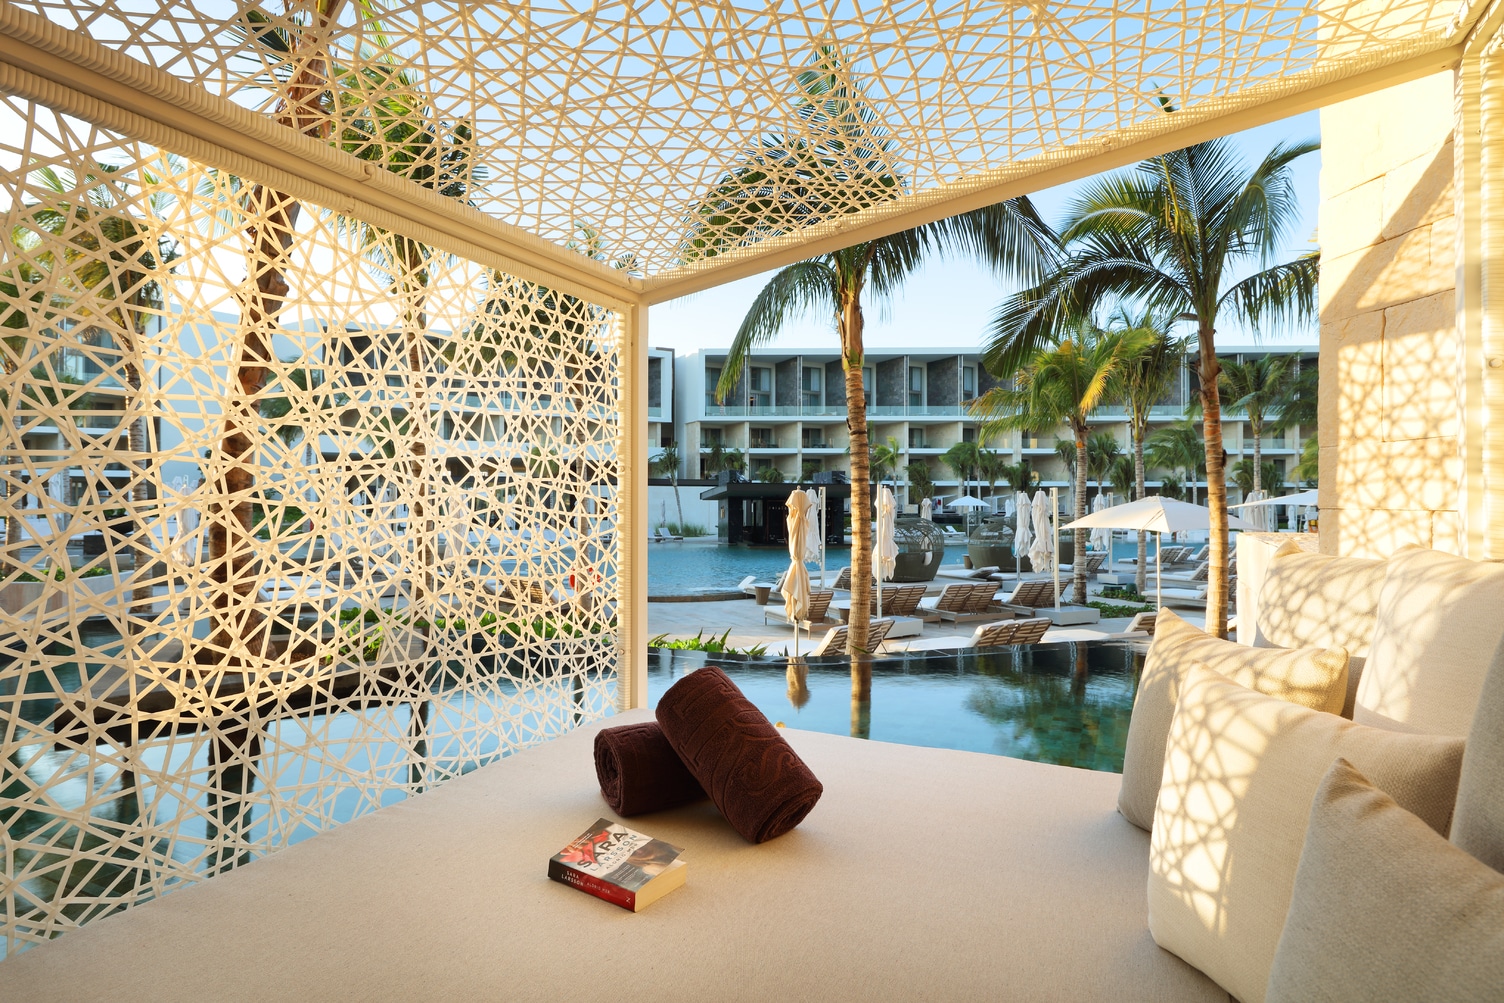 Interior of poolside cabana with white lattice walls at TRS Coral in Costa Mujeres, Mexico